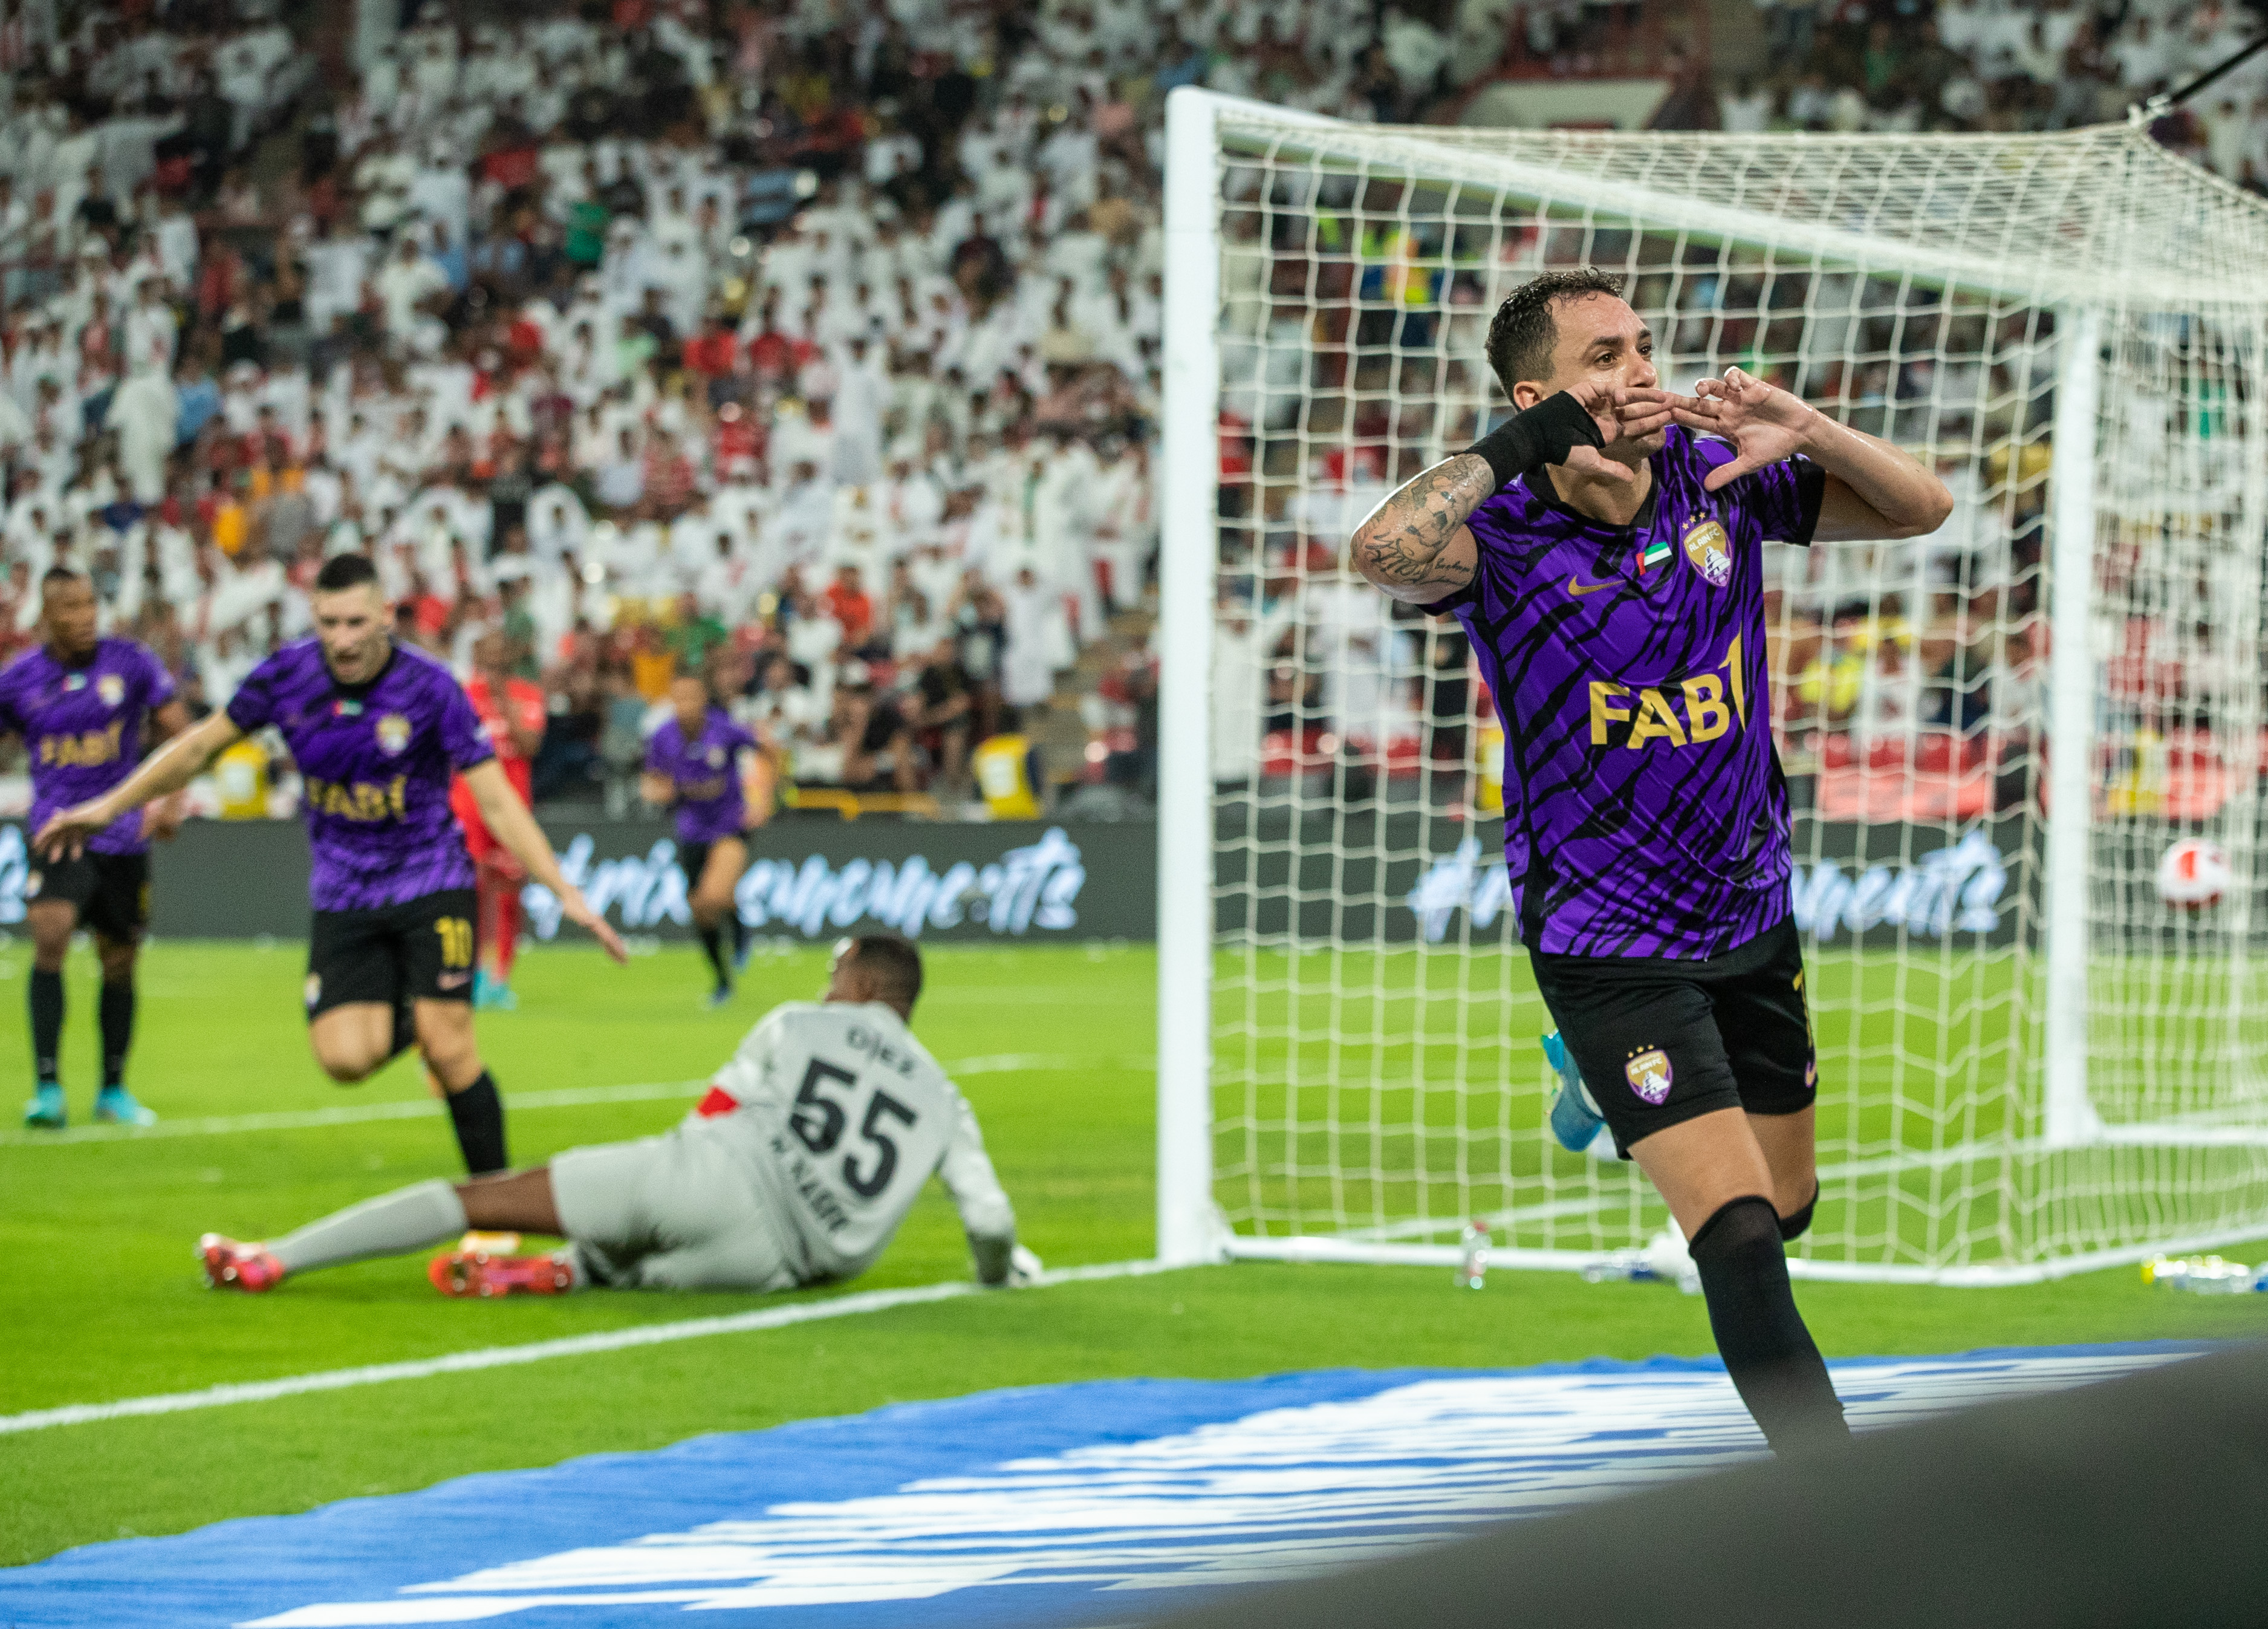 Al Ain claim Pro League Cup with penalty shoot-out victory against Shabab  Al Ahli